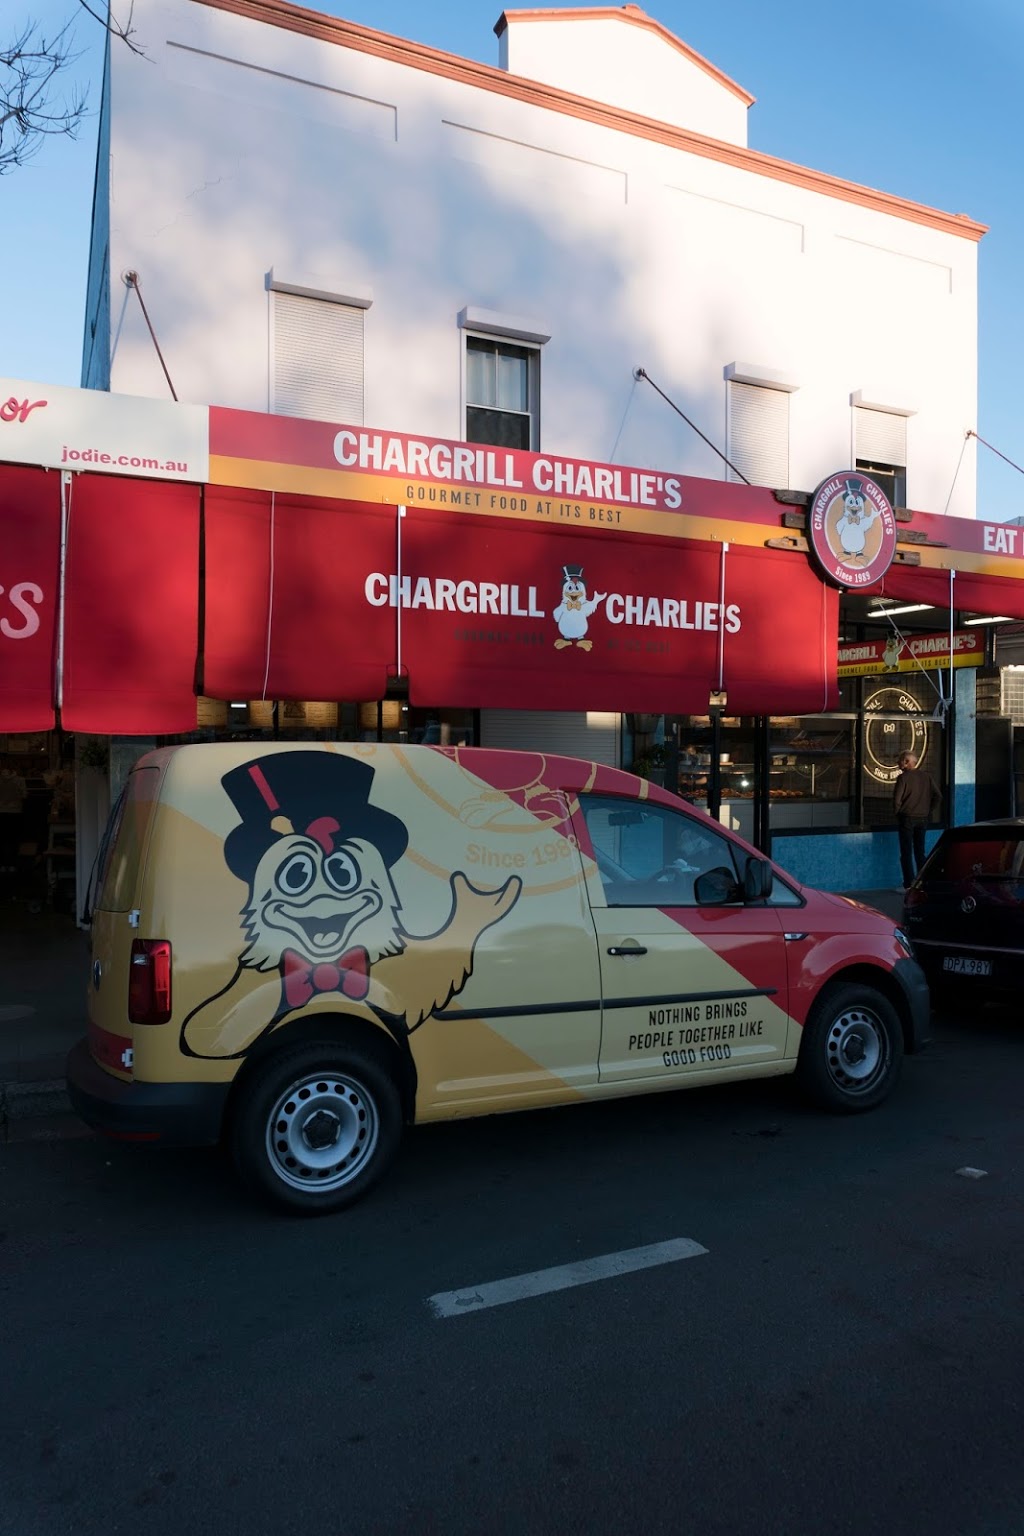 Chargrill Charlies Annandale | restaurant | 119-121 Johnston St, Annandale NSW 2038, Australia | 0295661662 OR +61 2 9566 1662